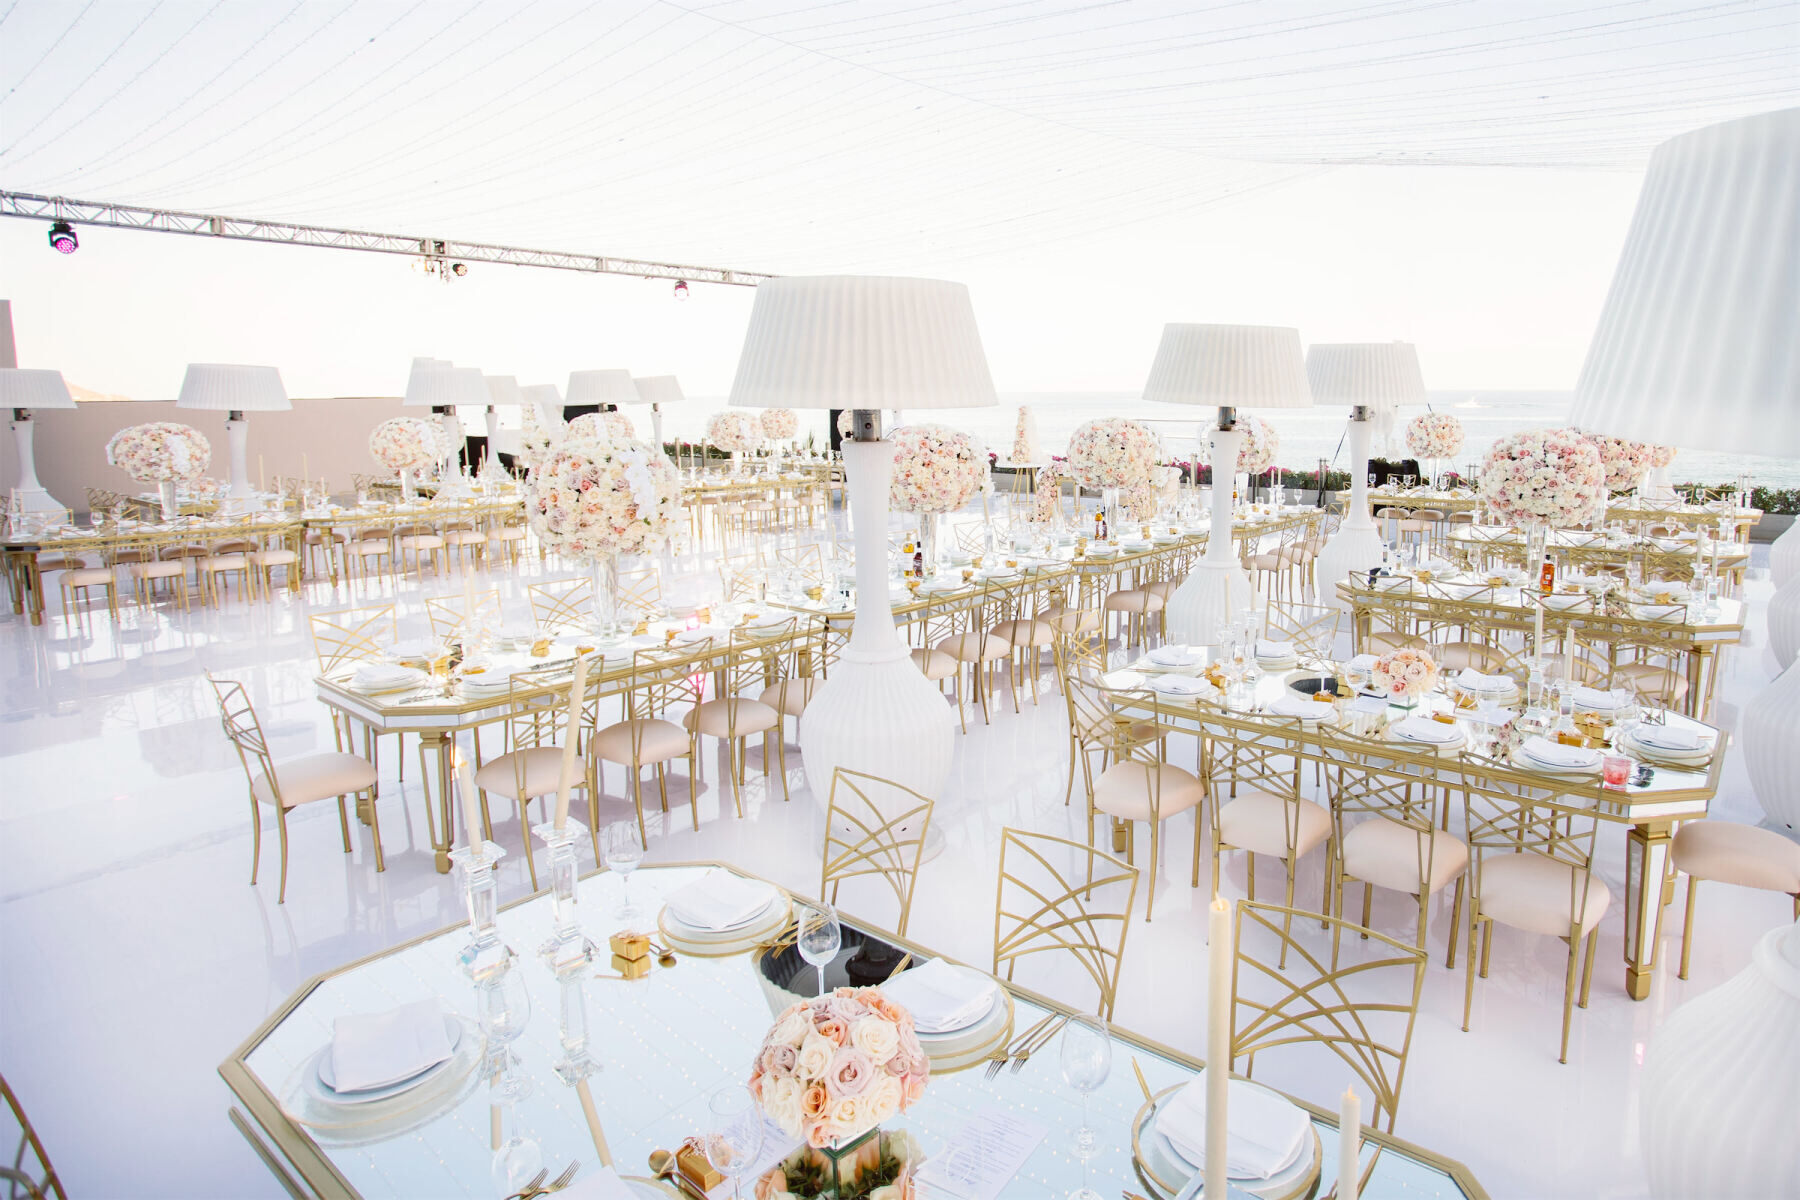 Mexican wedding: white and gold wedding reception outside on the beach